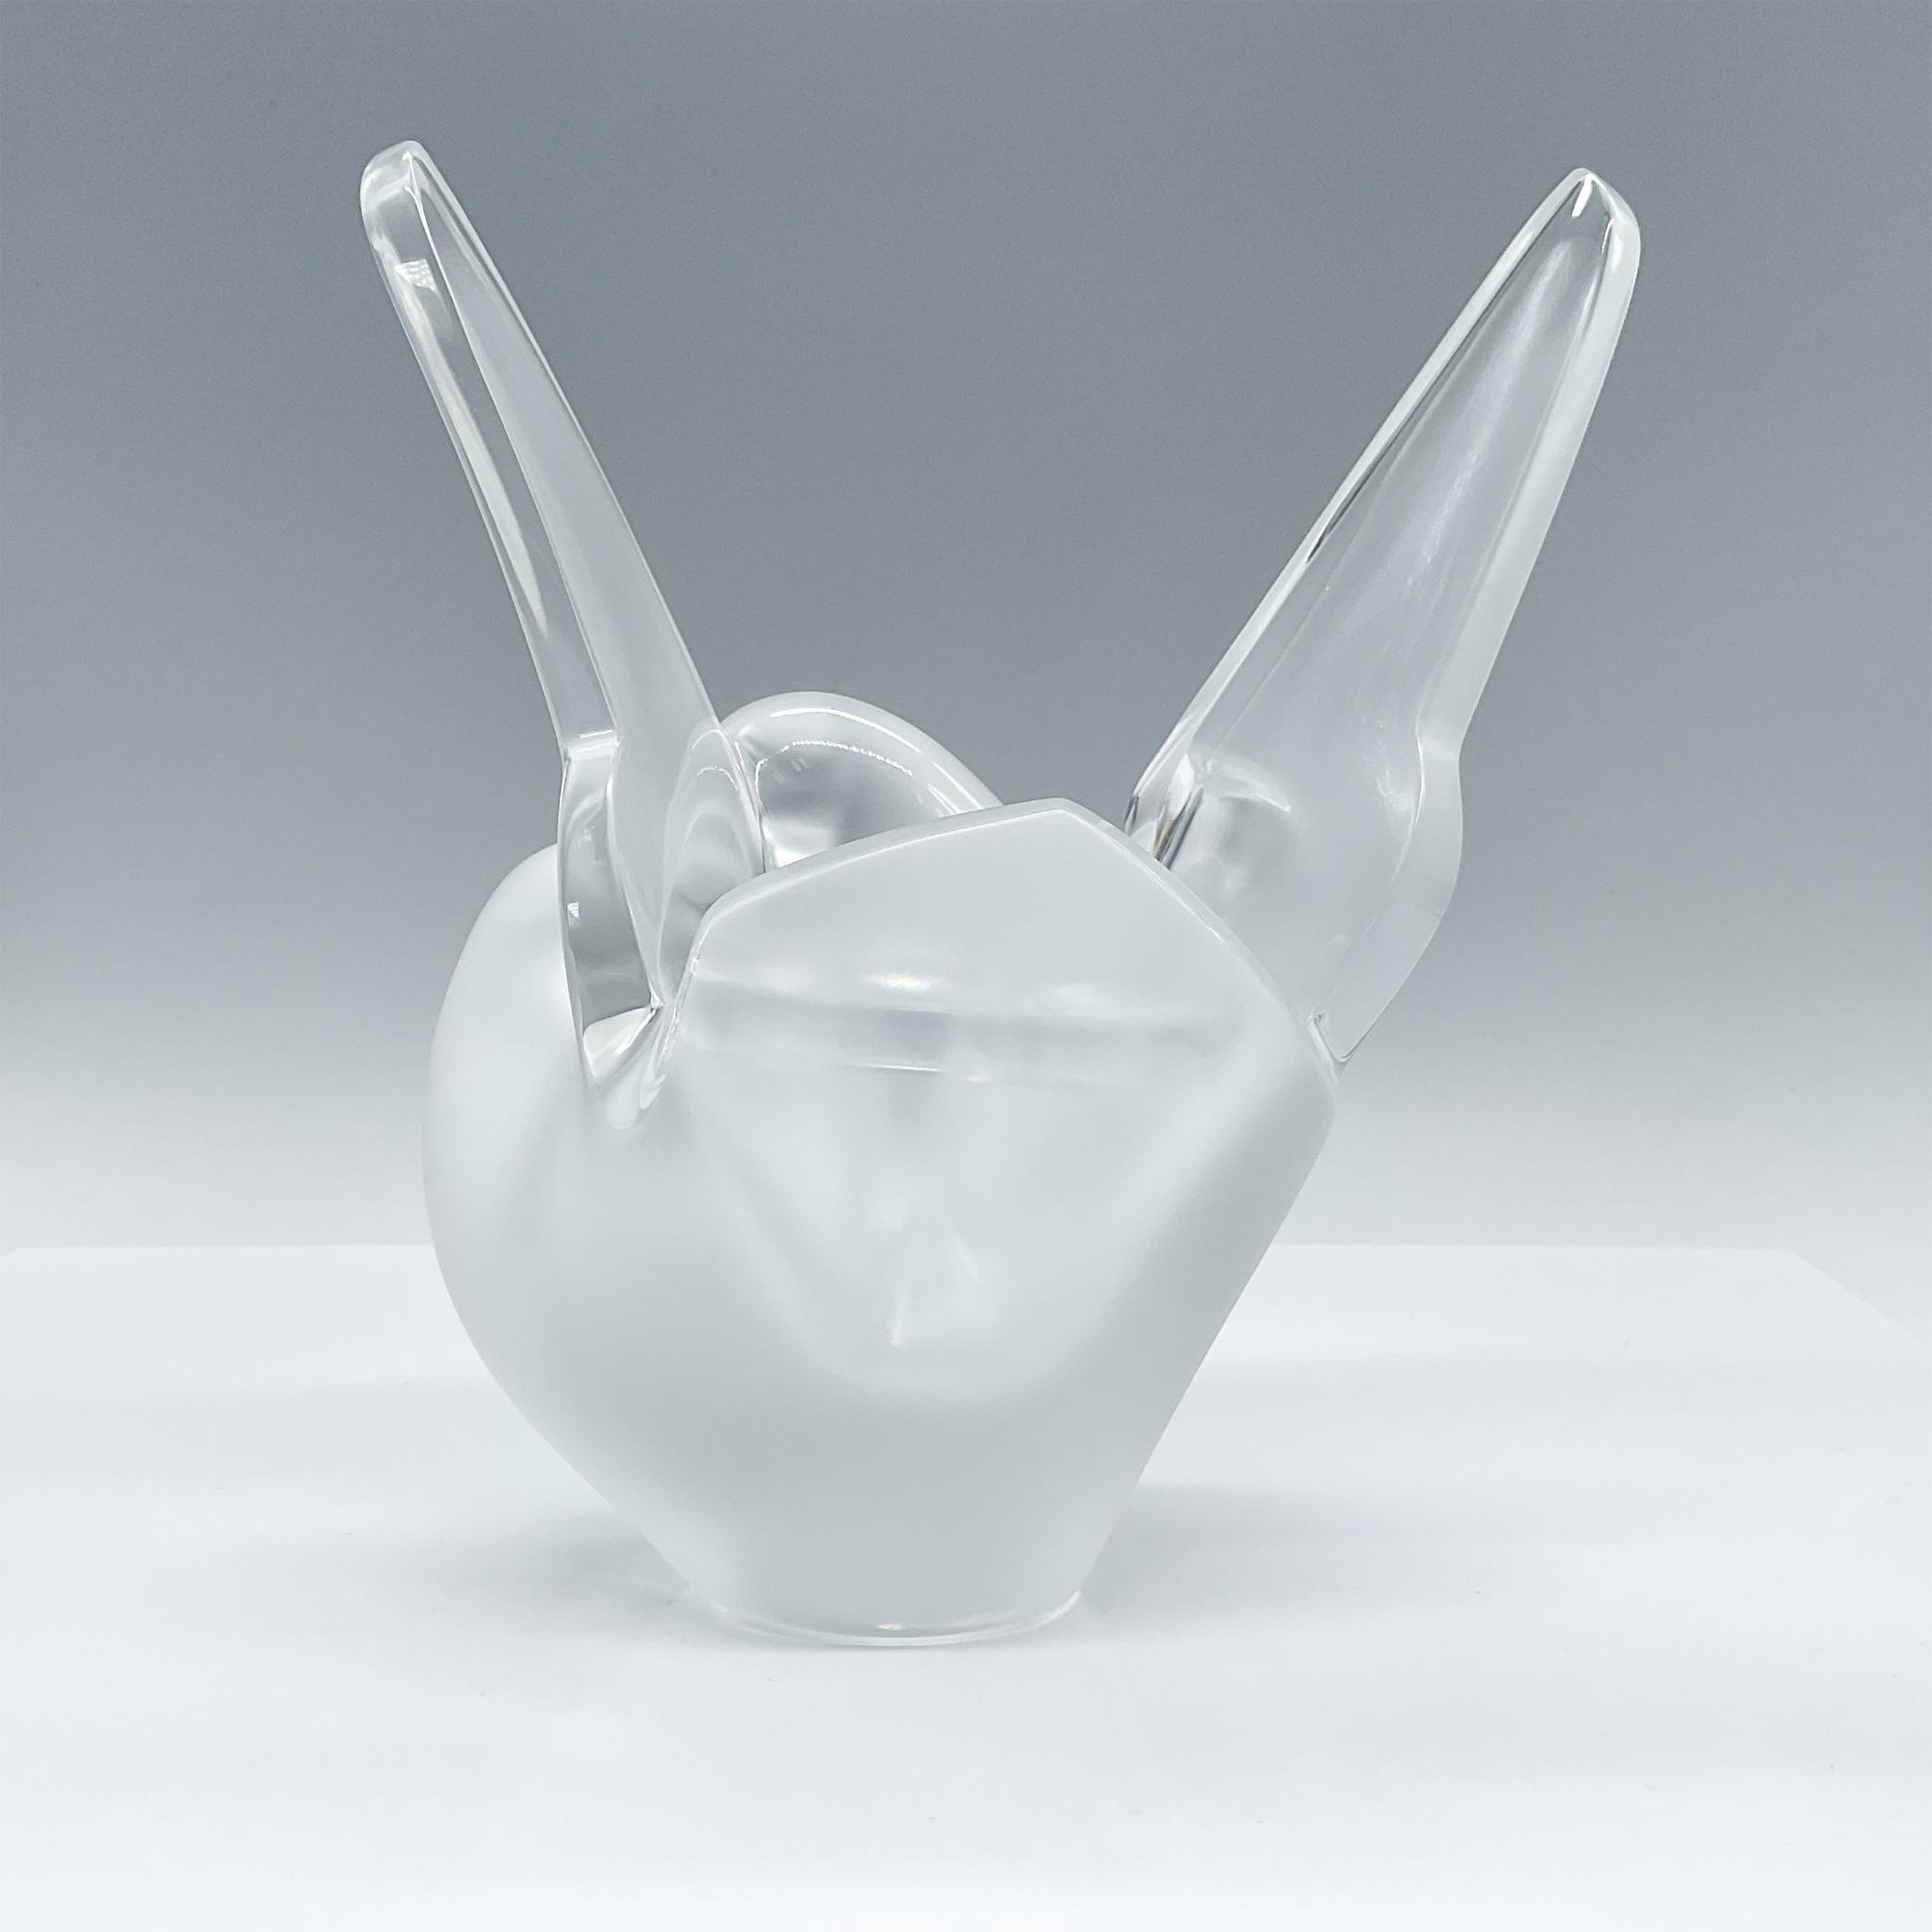 Lalique Crystal Flower Vase with Frog, Dove Pair, Sylvie - Image 2 of 4